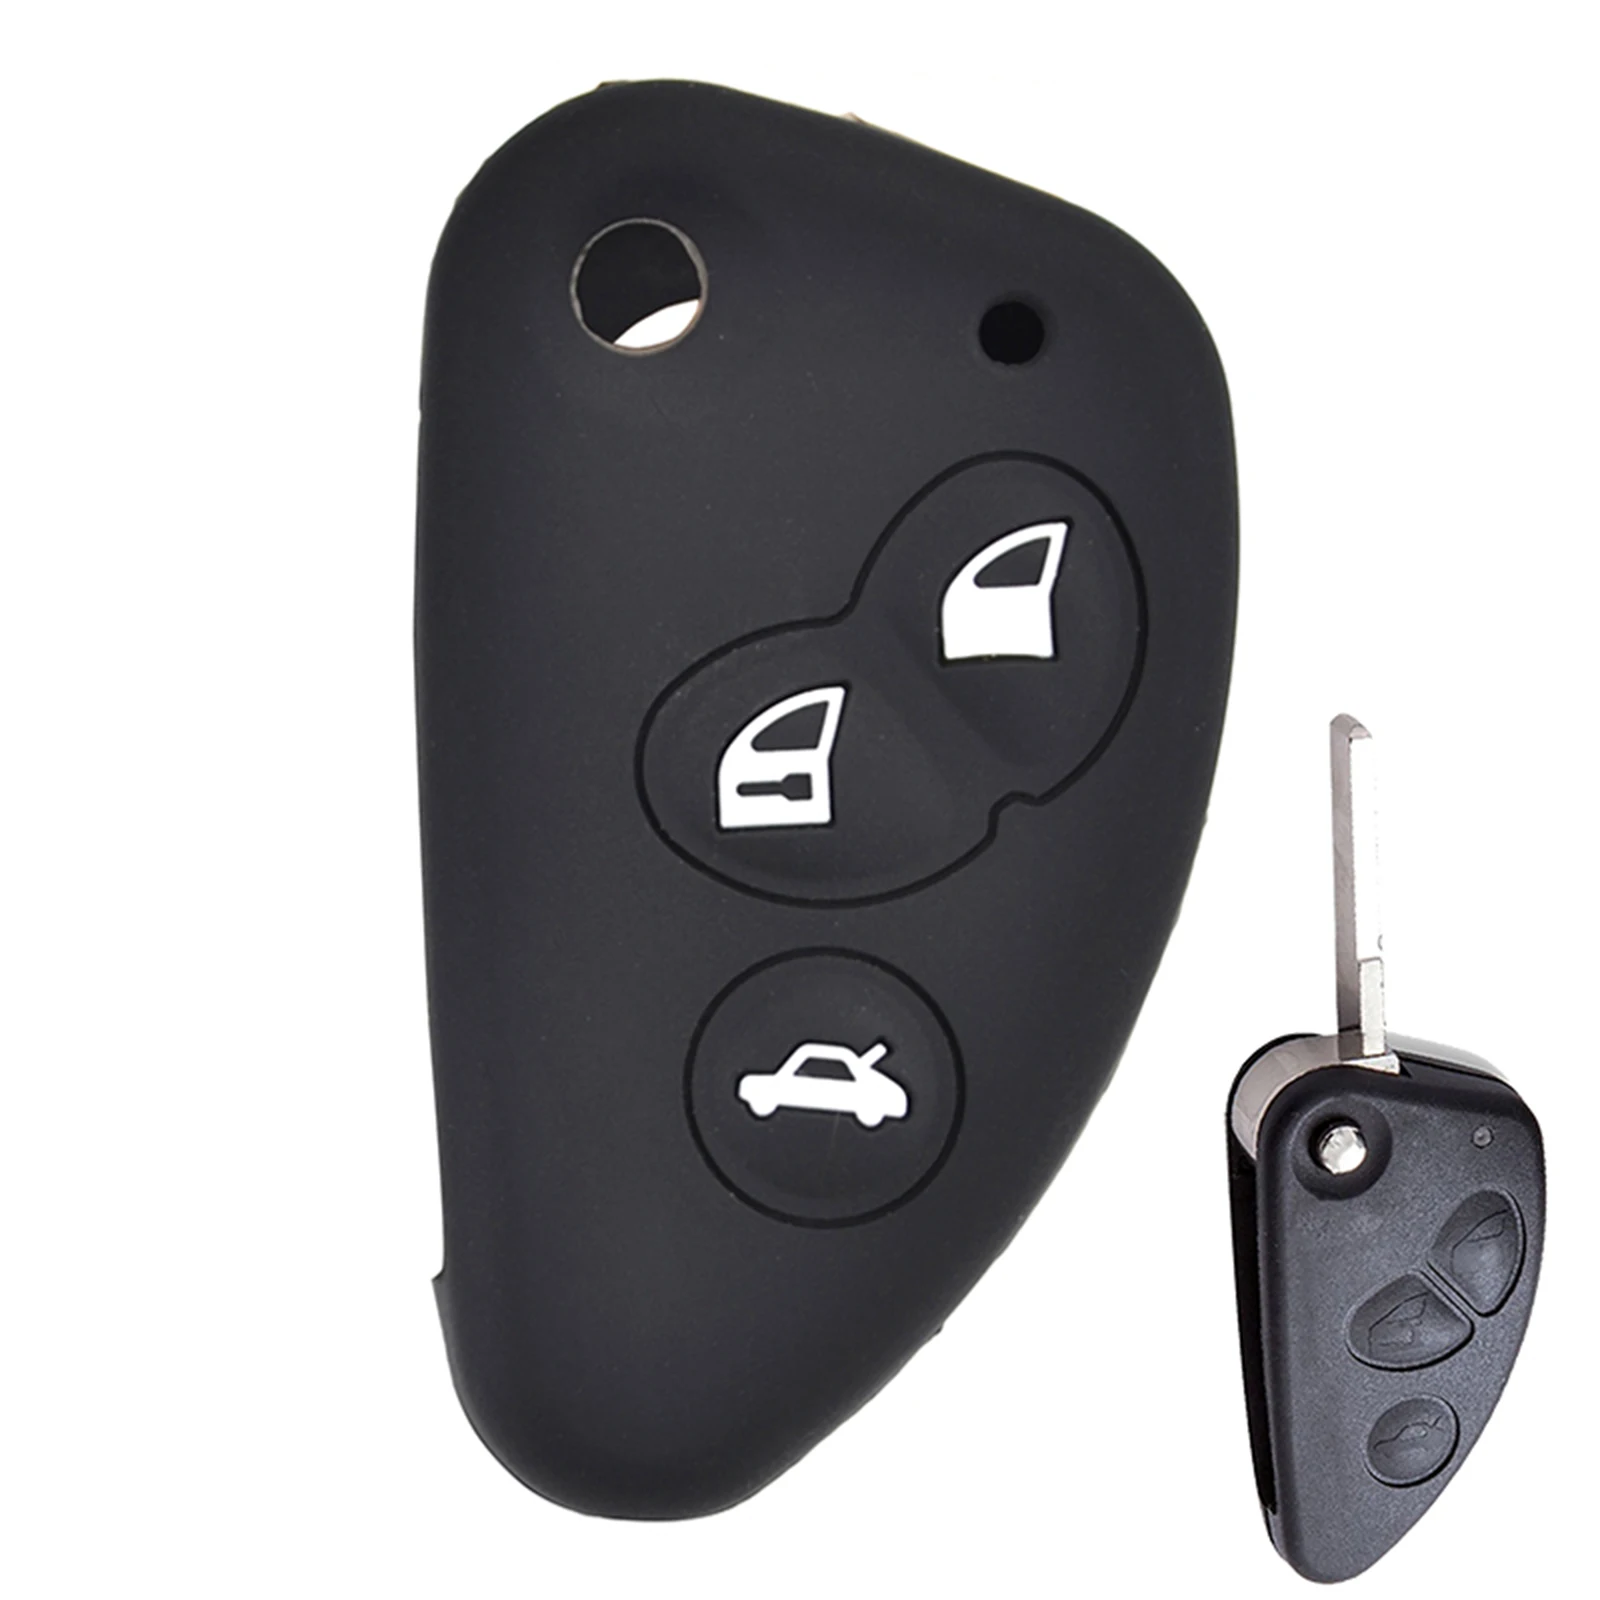 

For Alfa Romeo 147 156 166 Gt Jtd Ts Car Styling Holder Protector 3 Button Silicone Remote Flip Key Cover Case Fob Shell Rubber